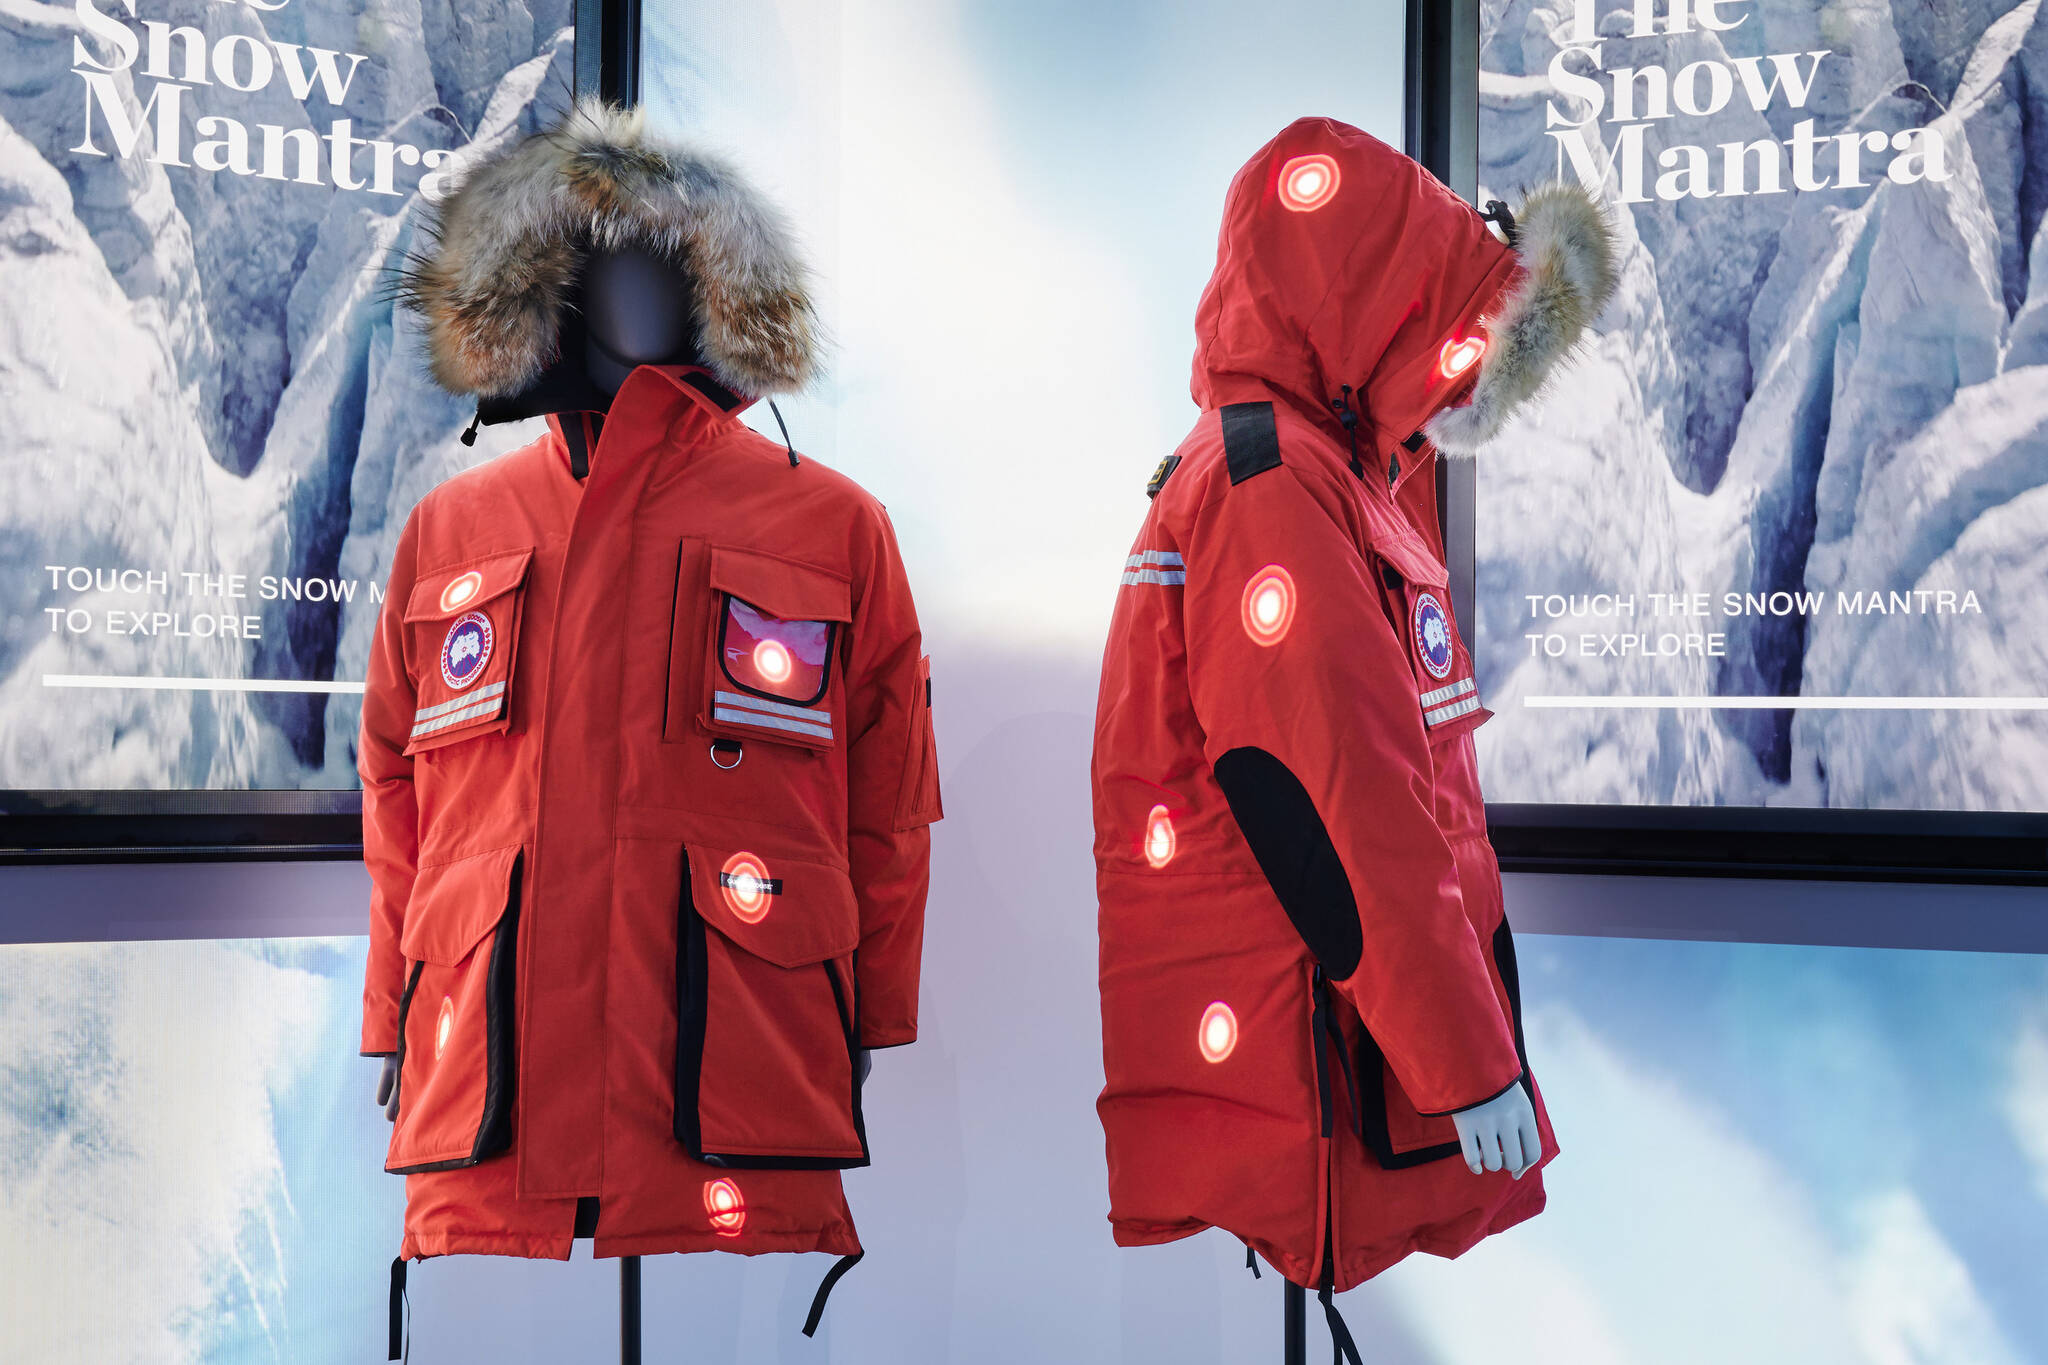 New Canada Goose store in Toronto doesn't have any coats in stock